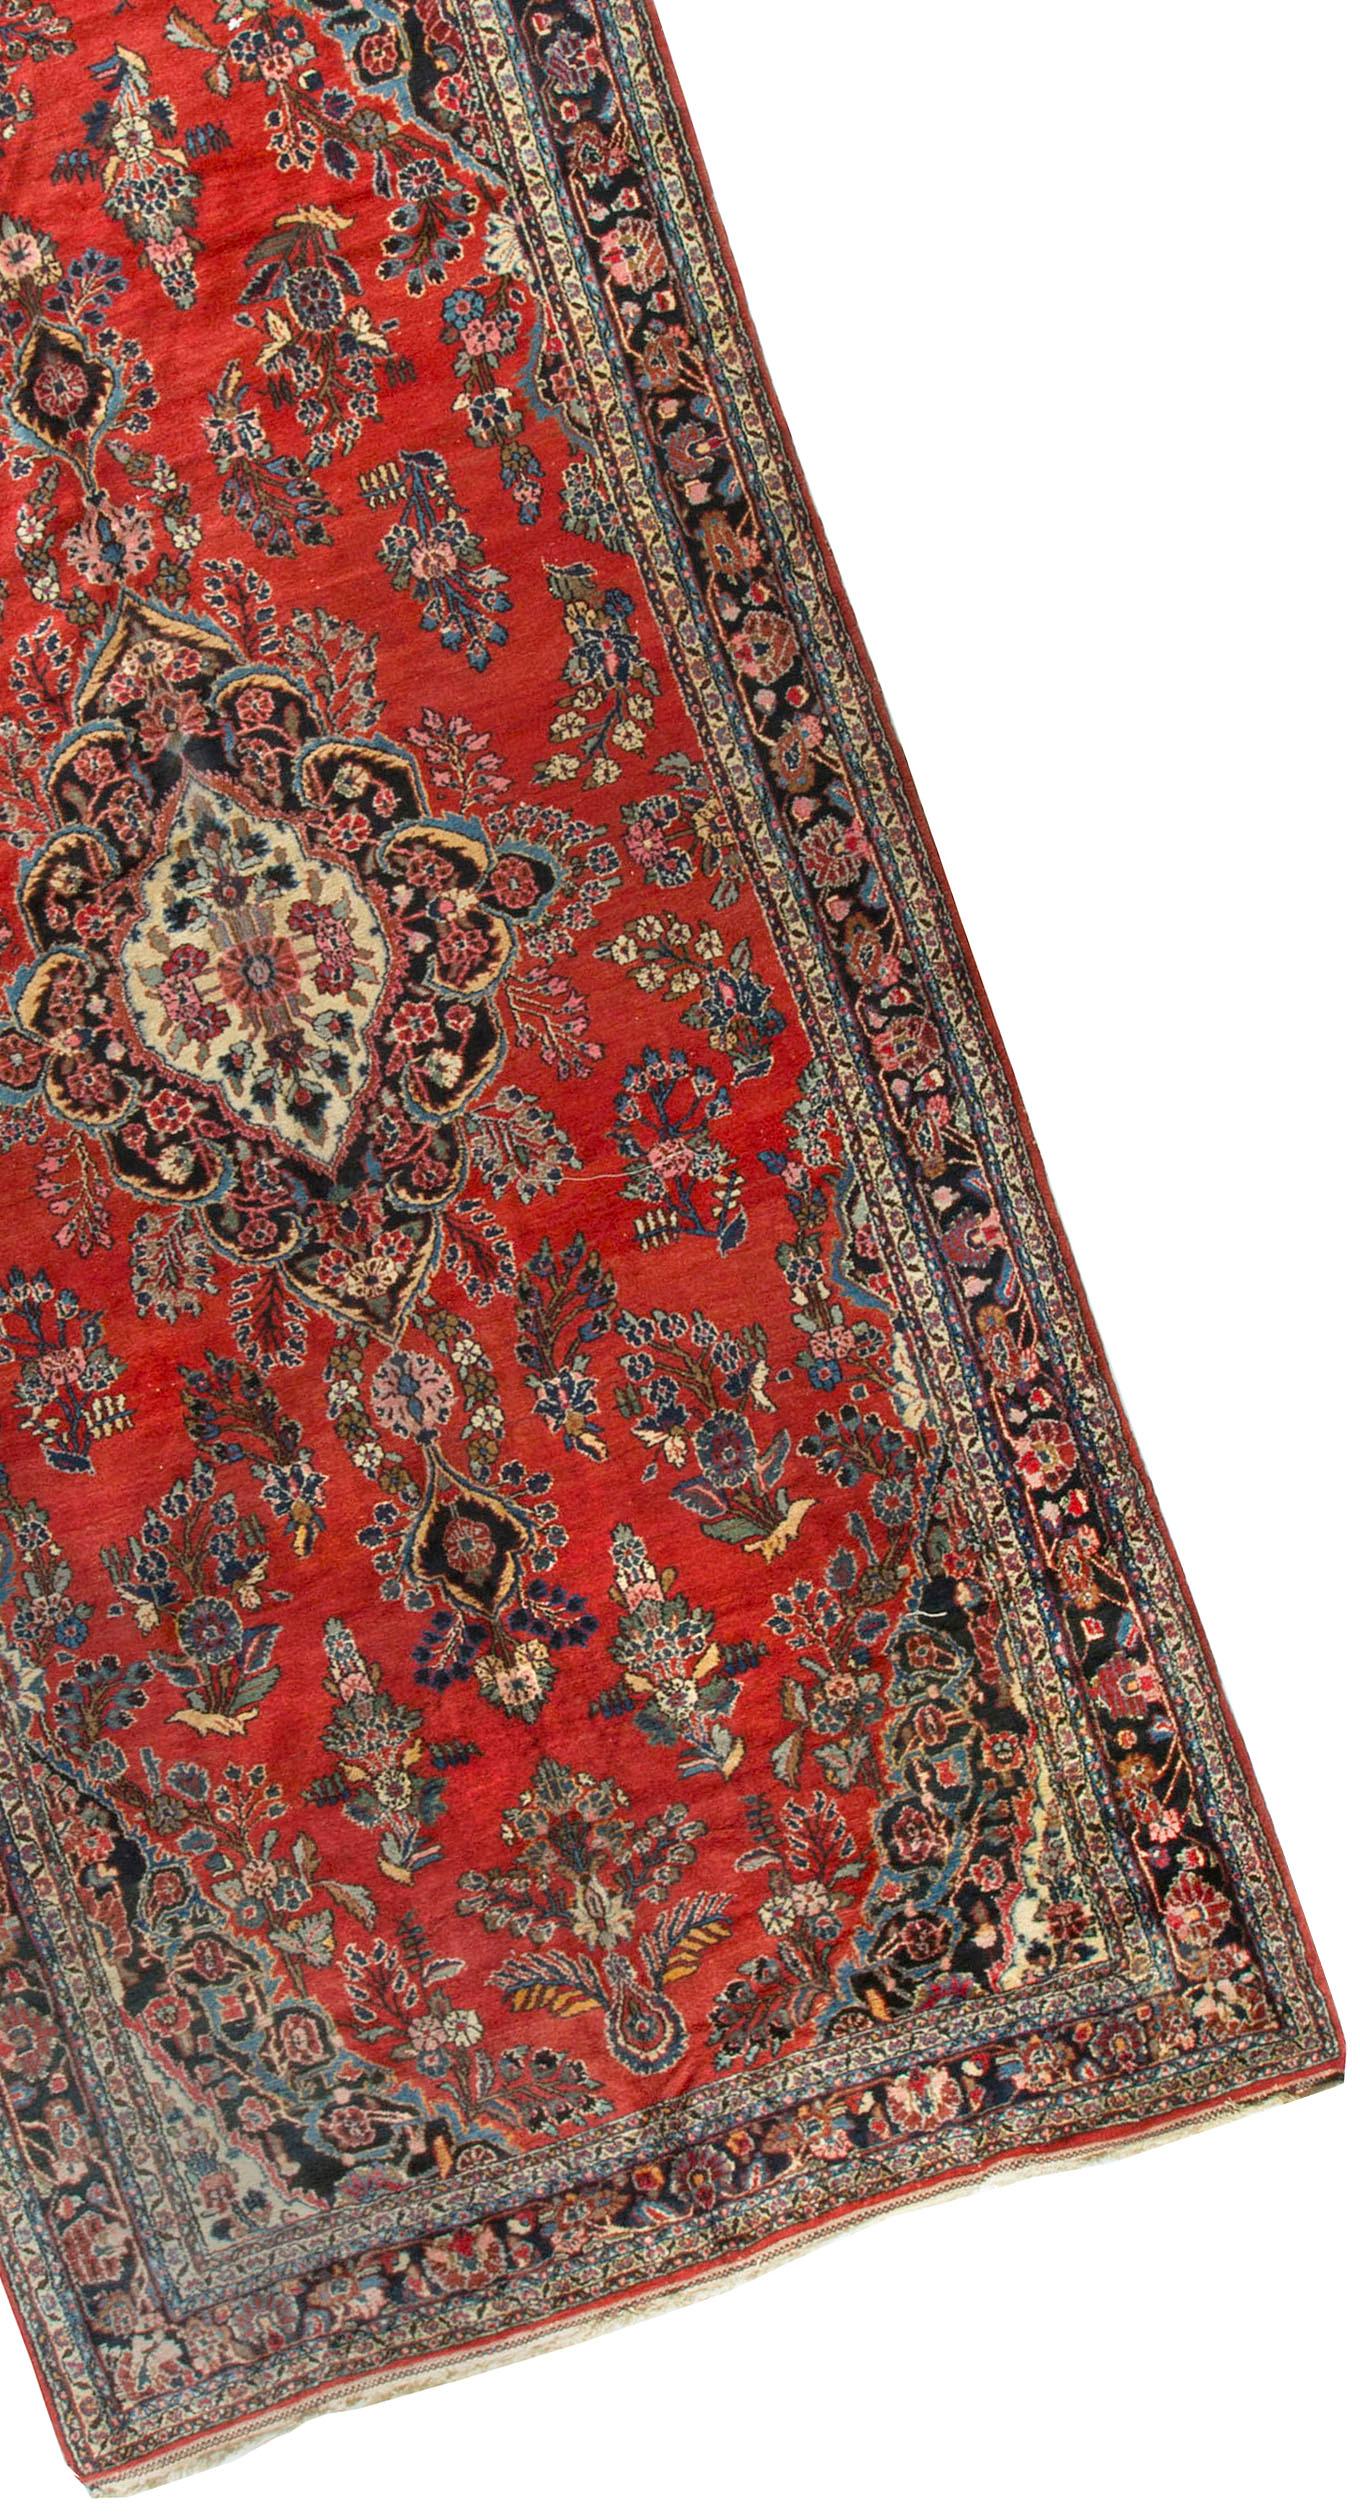 Vintage Oversize Persian Red Blue Kazvin Rug, circa 1940 9' x  19'2 In Good Condition For Sale In Secaucus, NJ